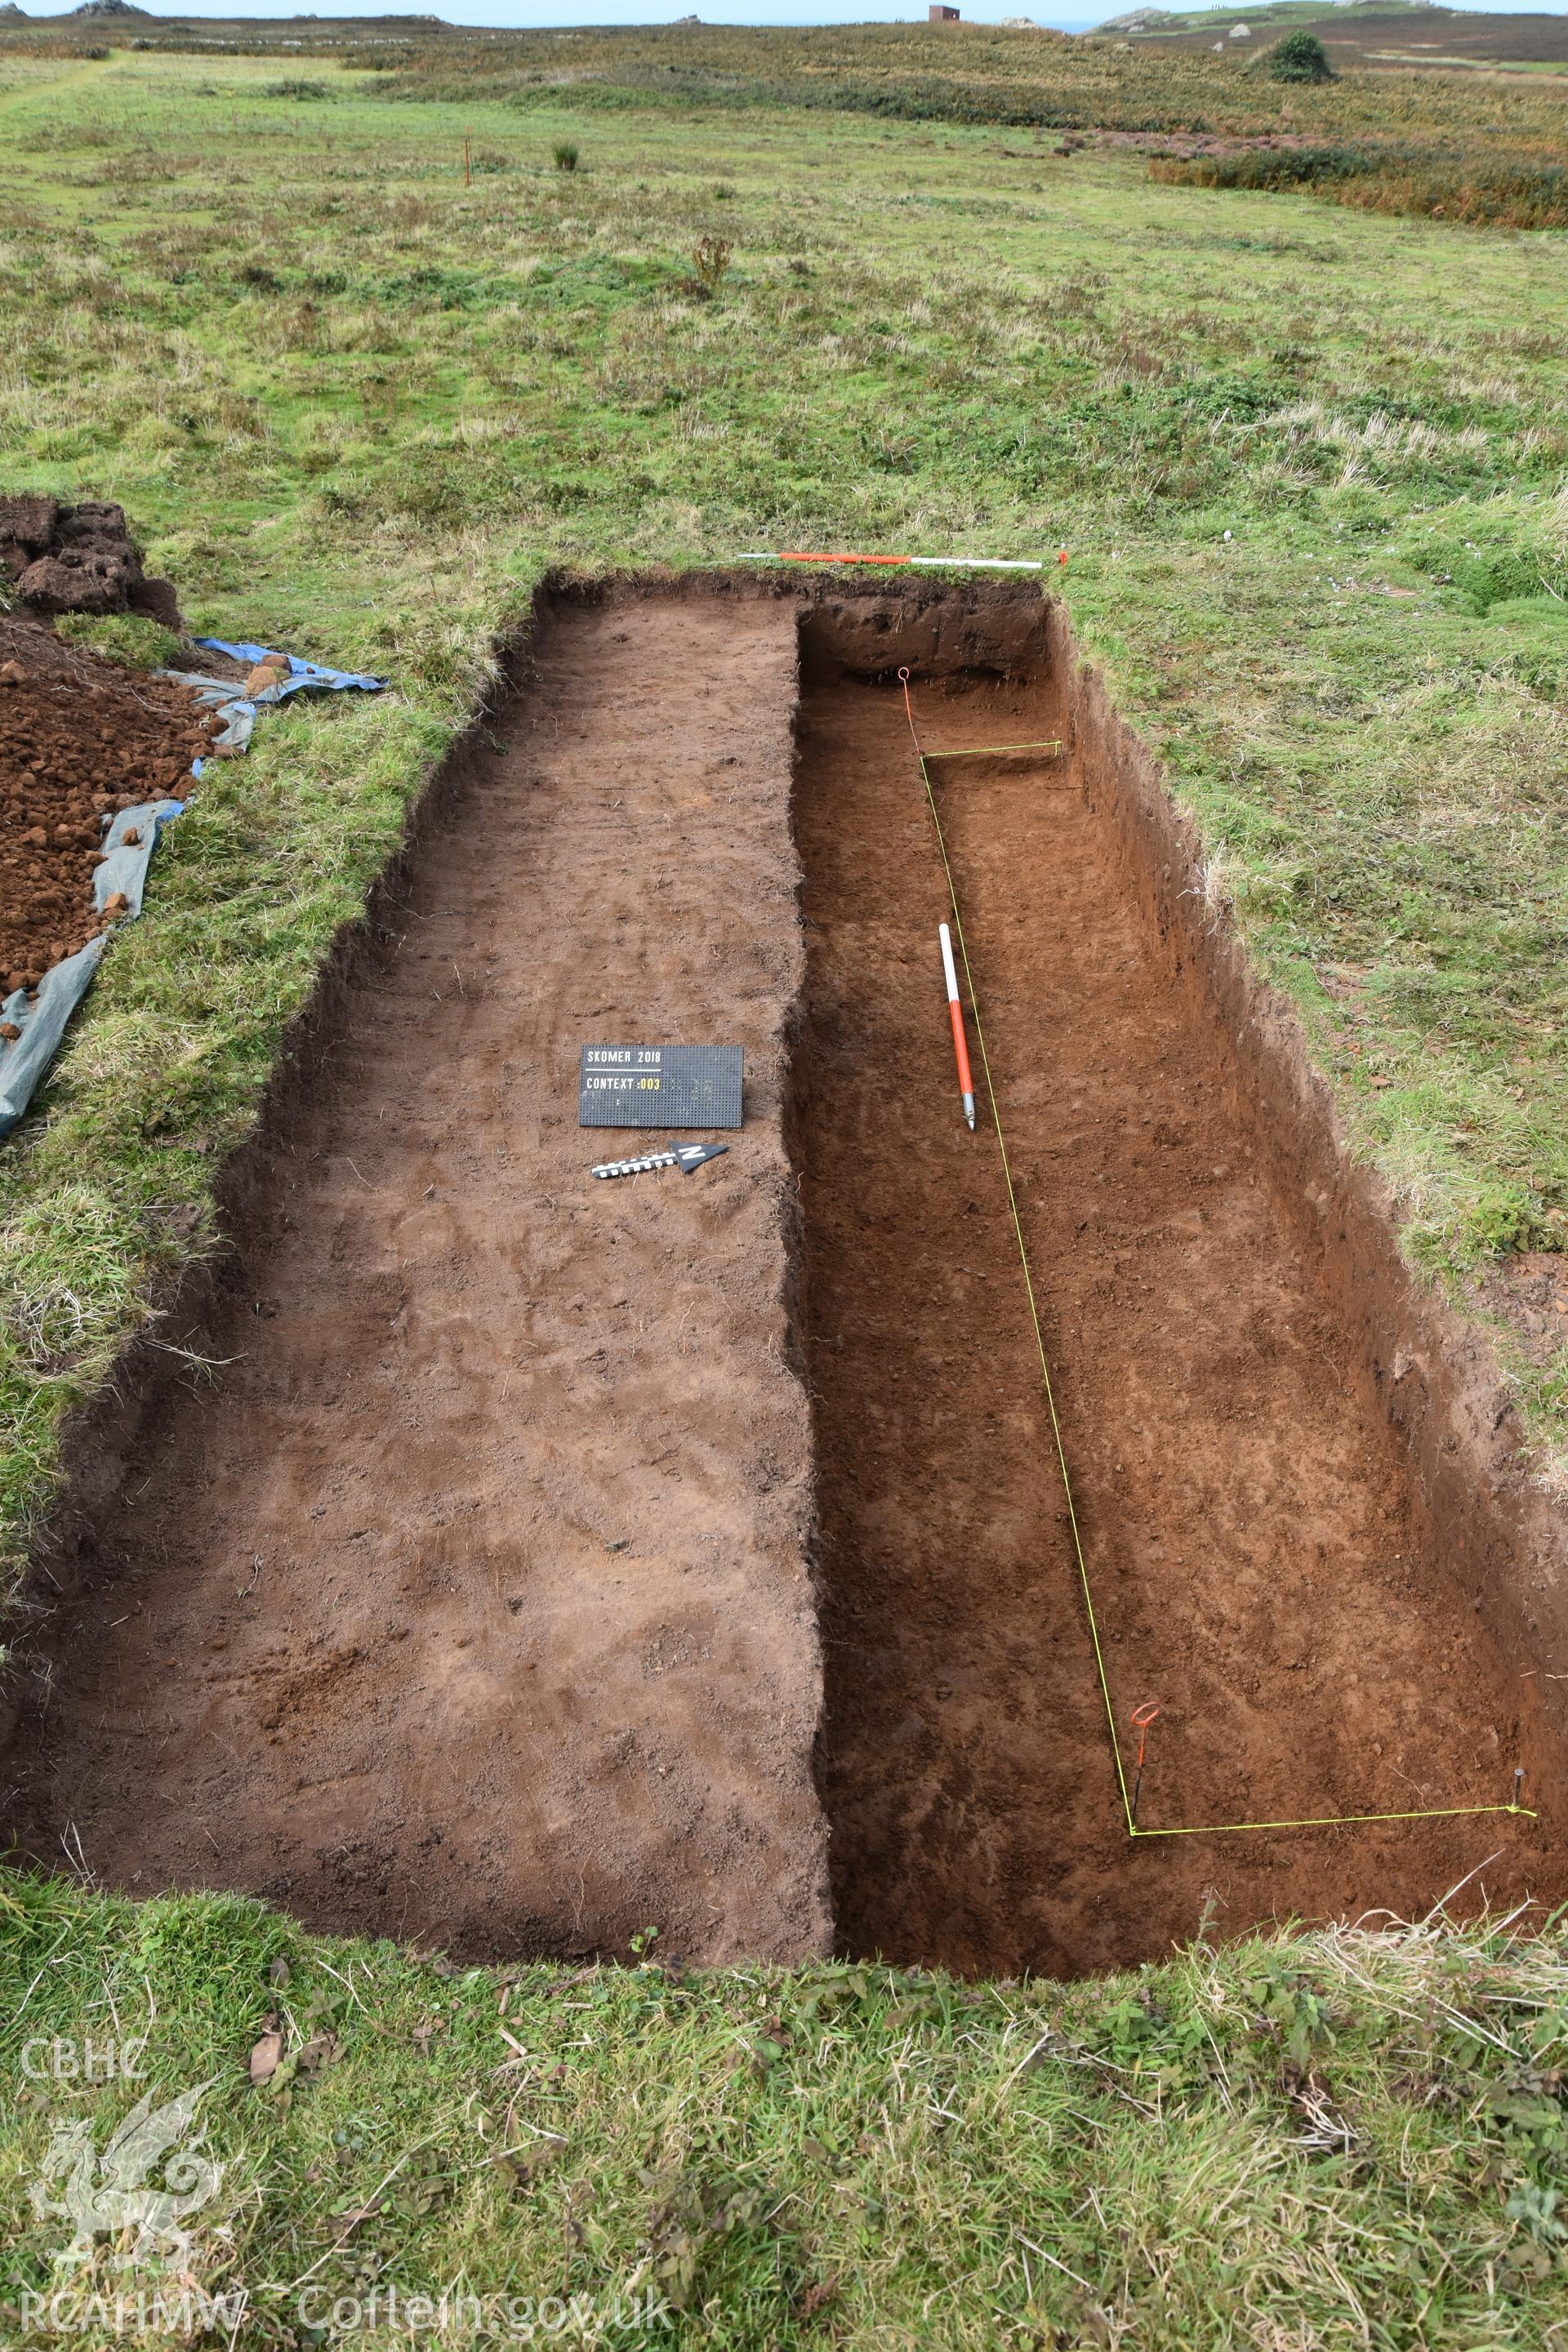 Investigator's photography showing the evaluation excavation of a geophysical anomaly in Well Meadow, Skomer Island, between 25-27th Sept 2018 as part of the Skomer Island Project. Trench from east at end of excavation.